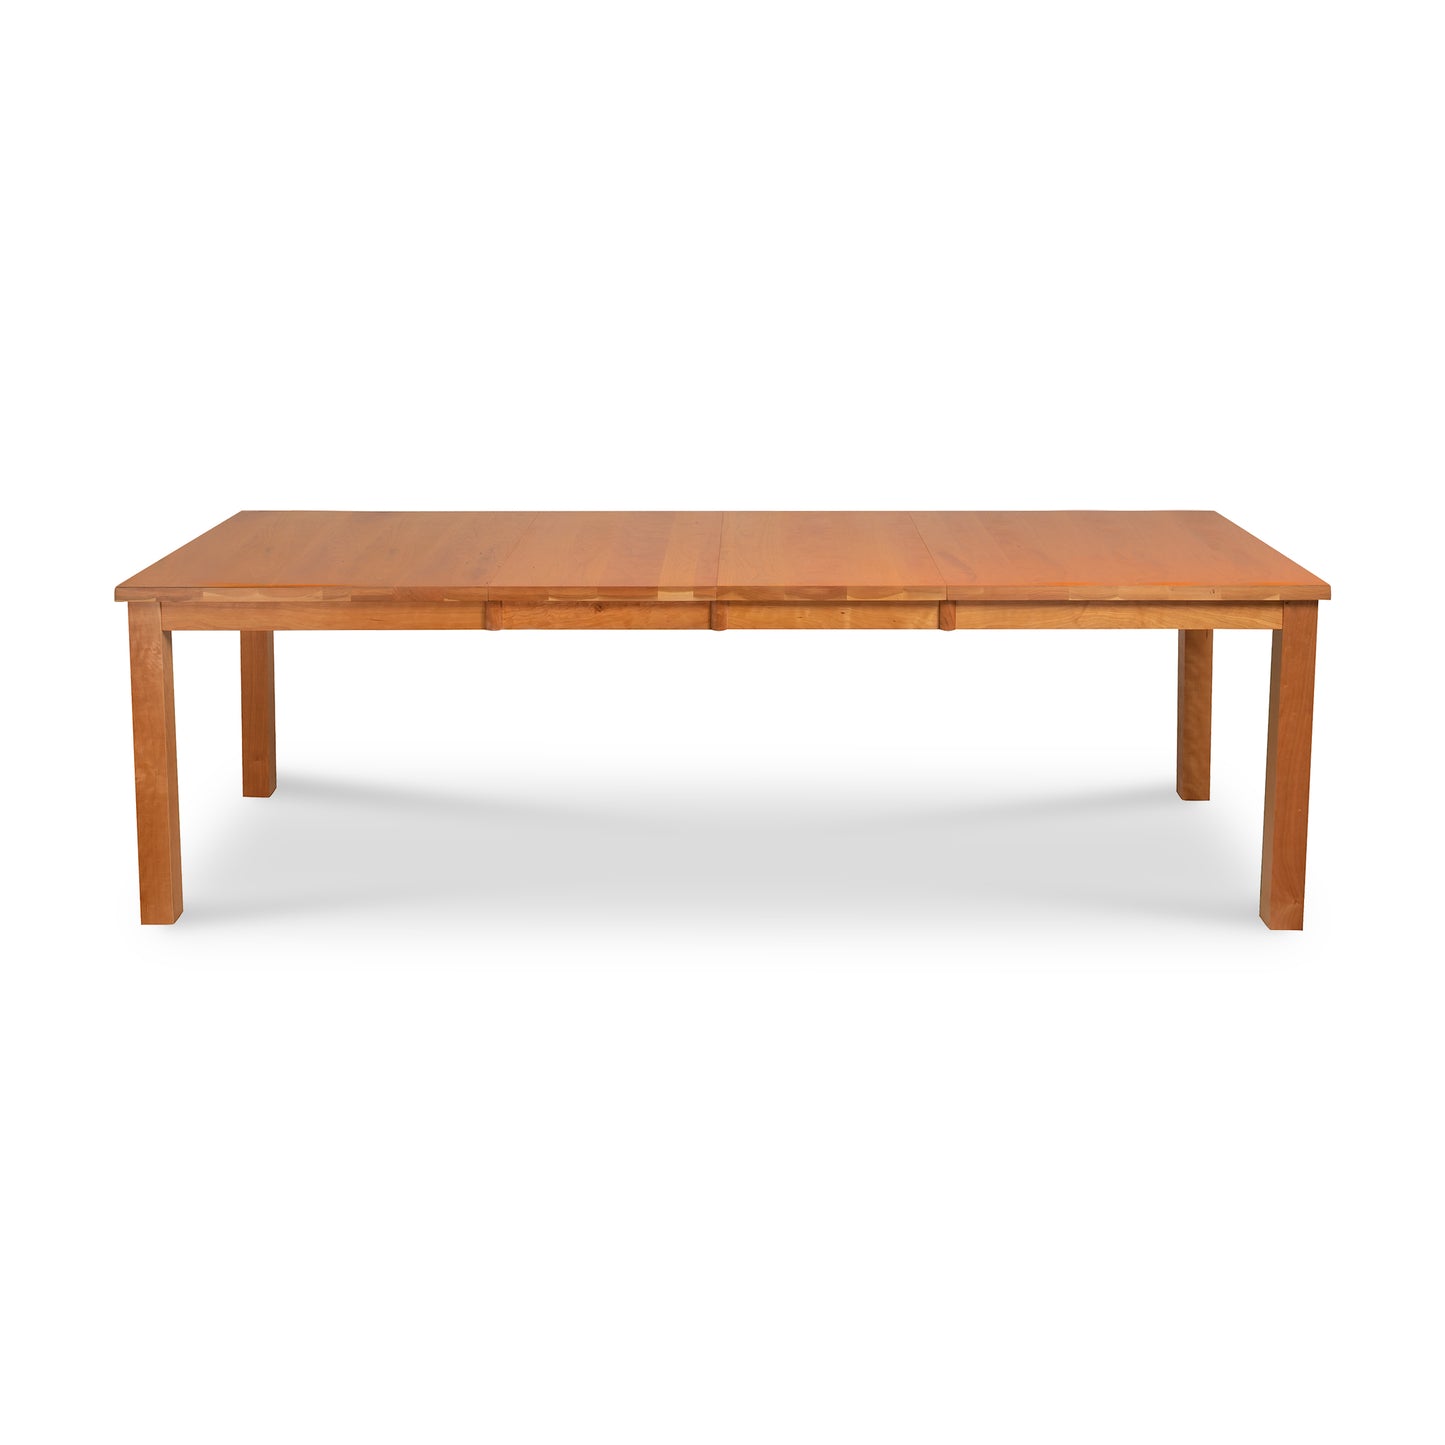 An eco-friendly Lyndon Furniture Modern Mission Parsons Extension Table on a white background.